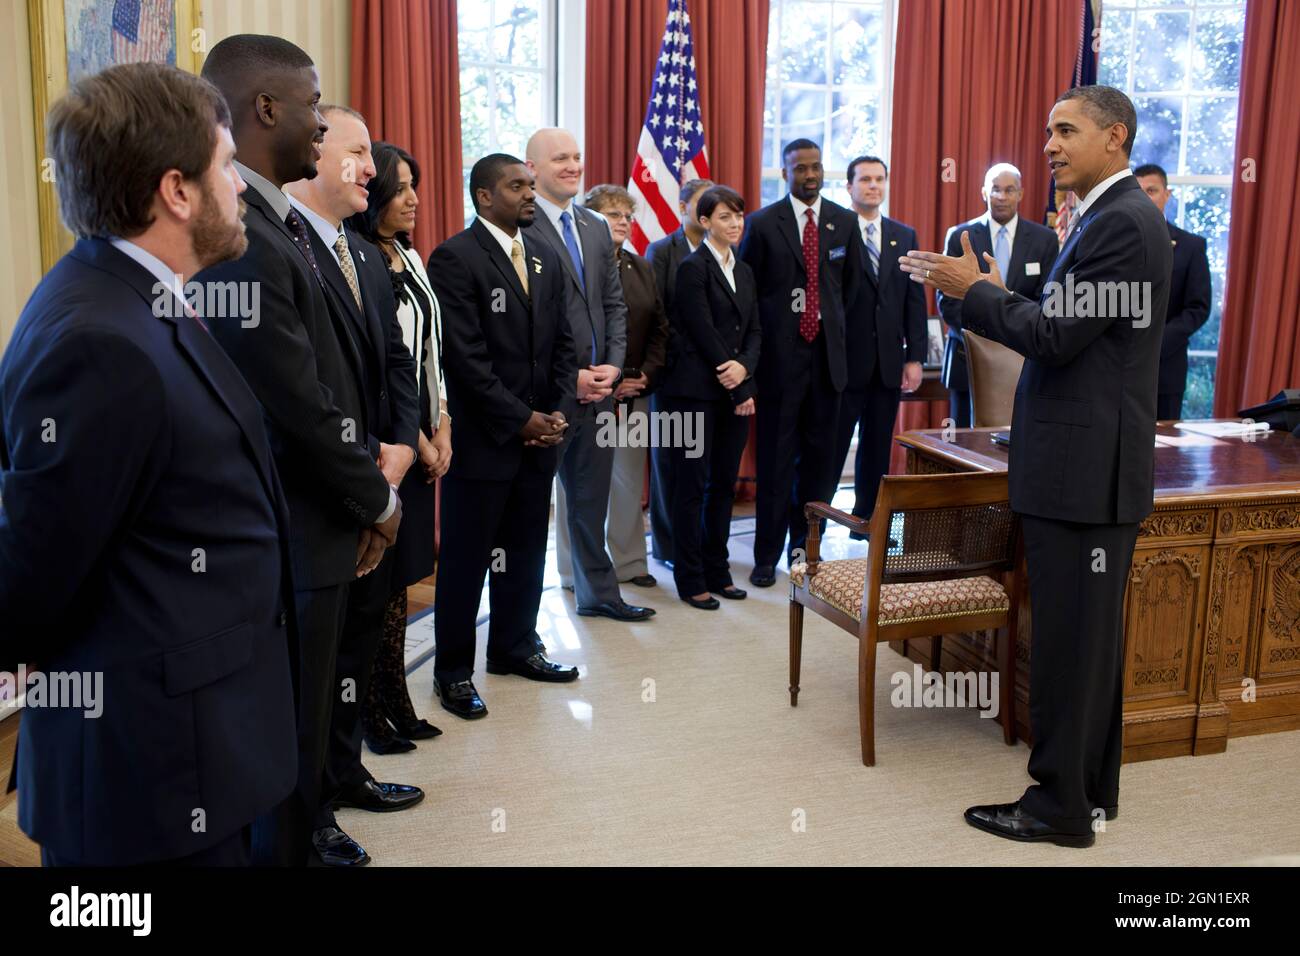 President Barack Obama greets representatives from leading veterans service organizations in the Oval Office before delivering remarks on the American Jobs Act in the Rose Garden, Nov. 7, 2011. The President spoke about tax credits included in the American Jobs Act and new executive actions that will help get veterans back to work. (Official White House Photo by Pete Souza)  This official White House photograph is being made available only for publication by news organizations and/or for personal use printing by the subject(s) of the photograph. The photograph may not be manipulated in any way Stock Photo